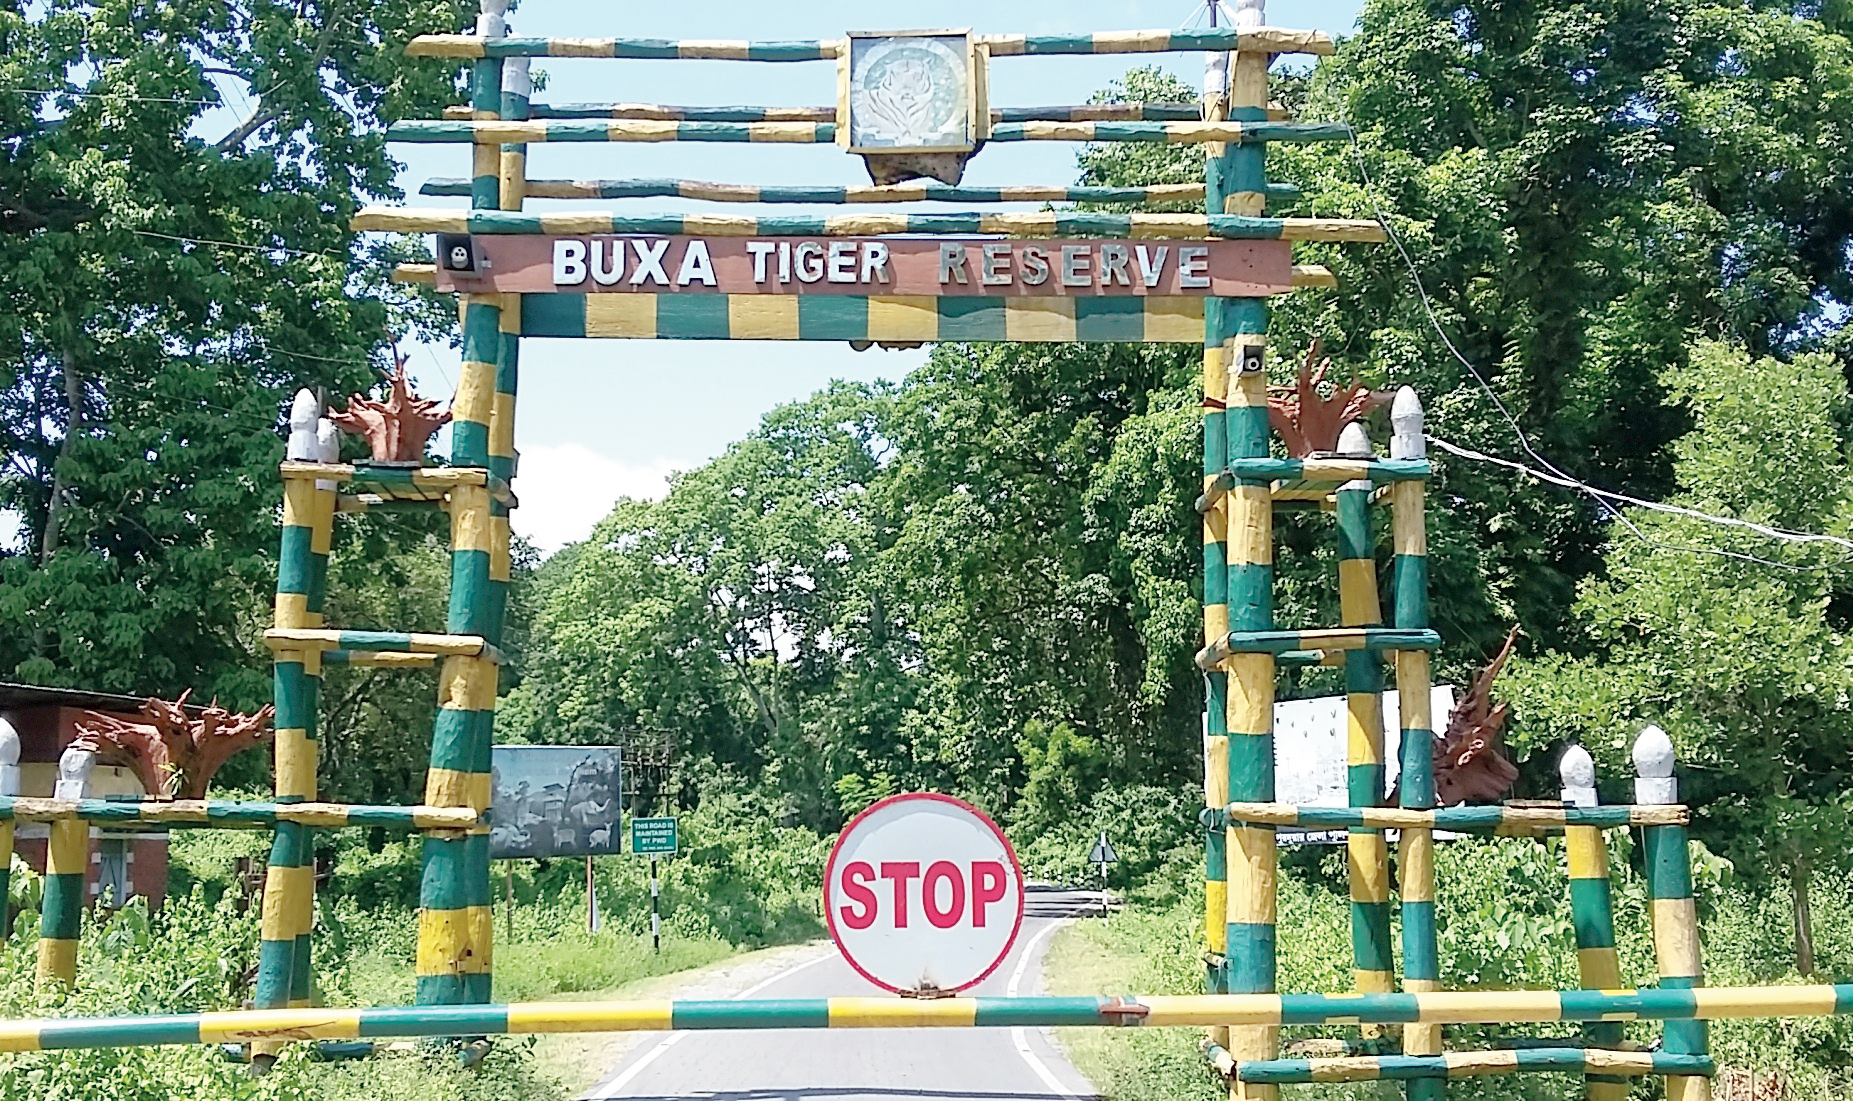 The entrance to the Buxa Tiger Reserve. 
